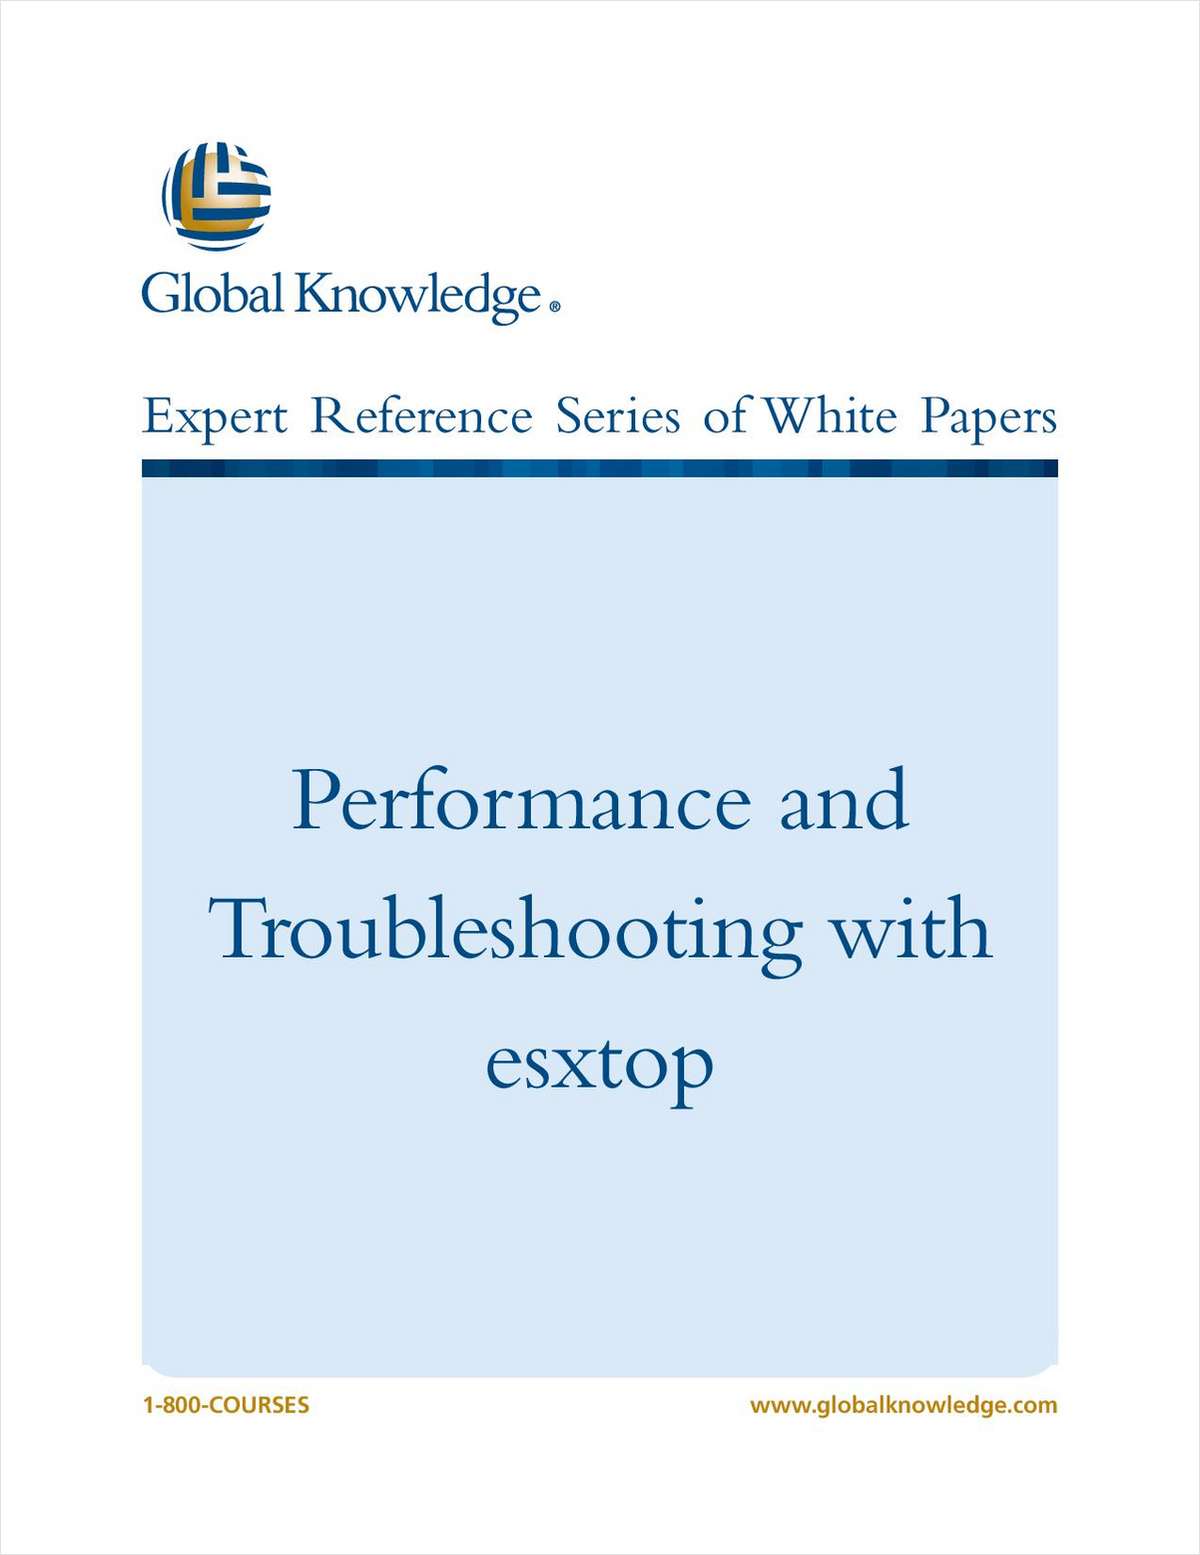 Performance and Troubleshooting with esxtop